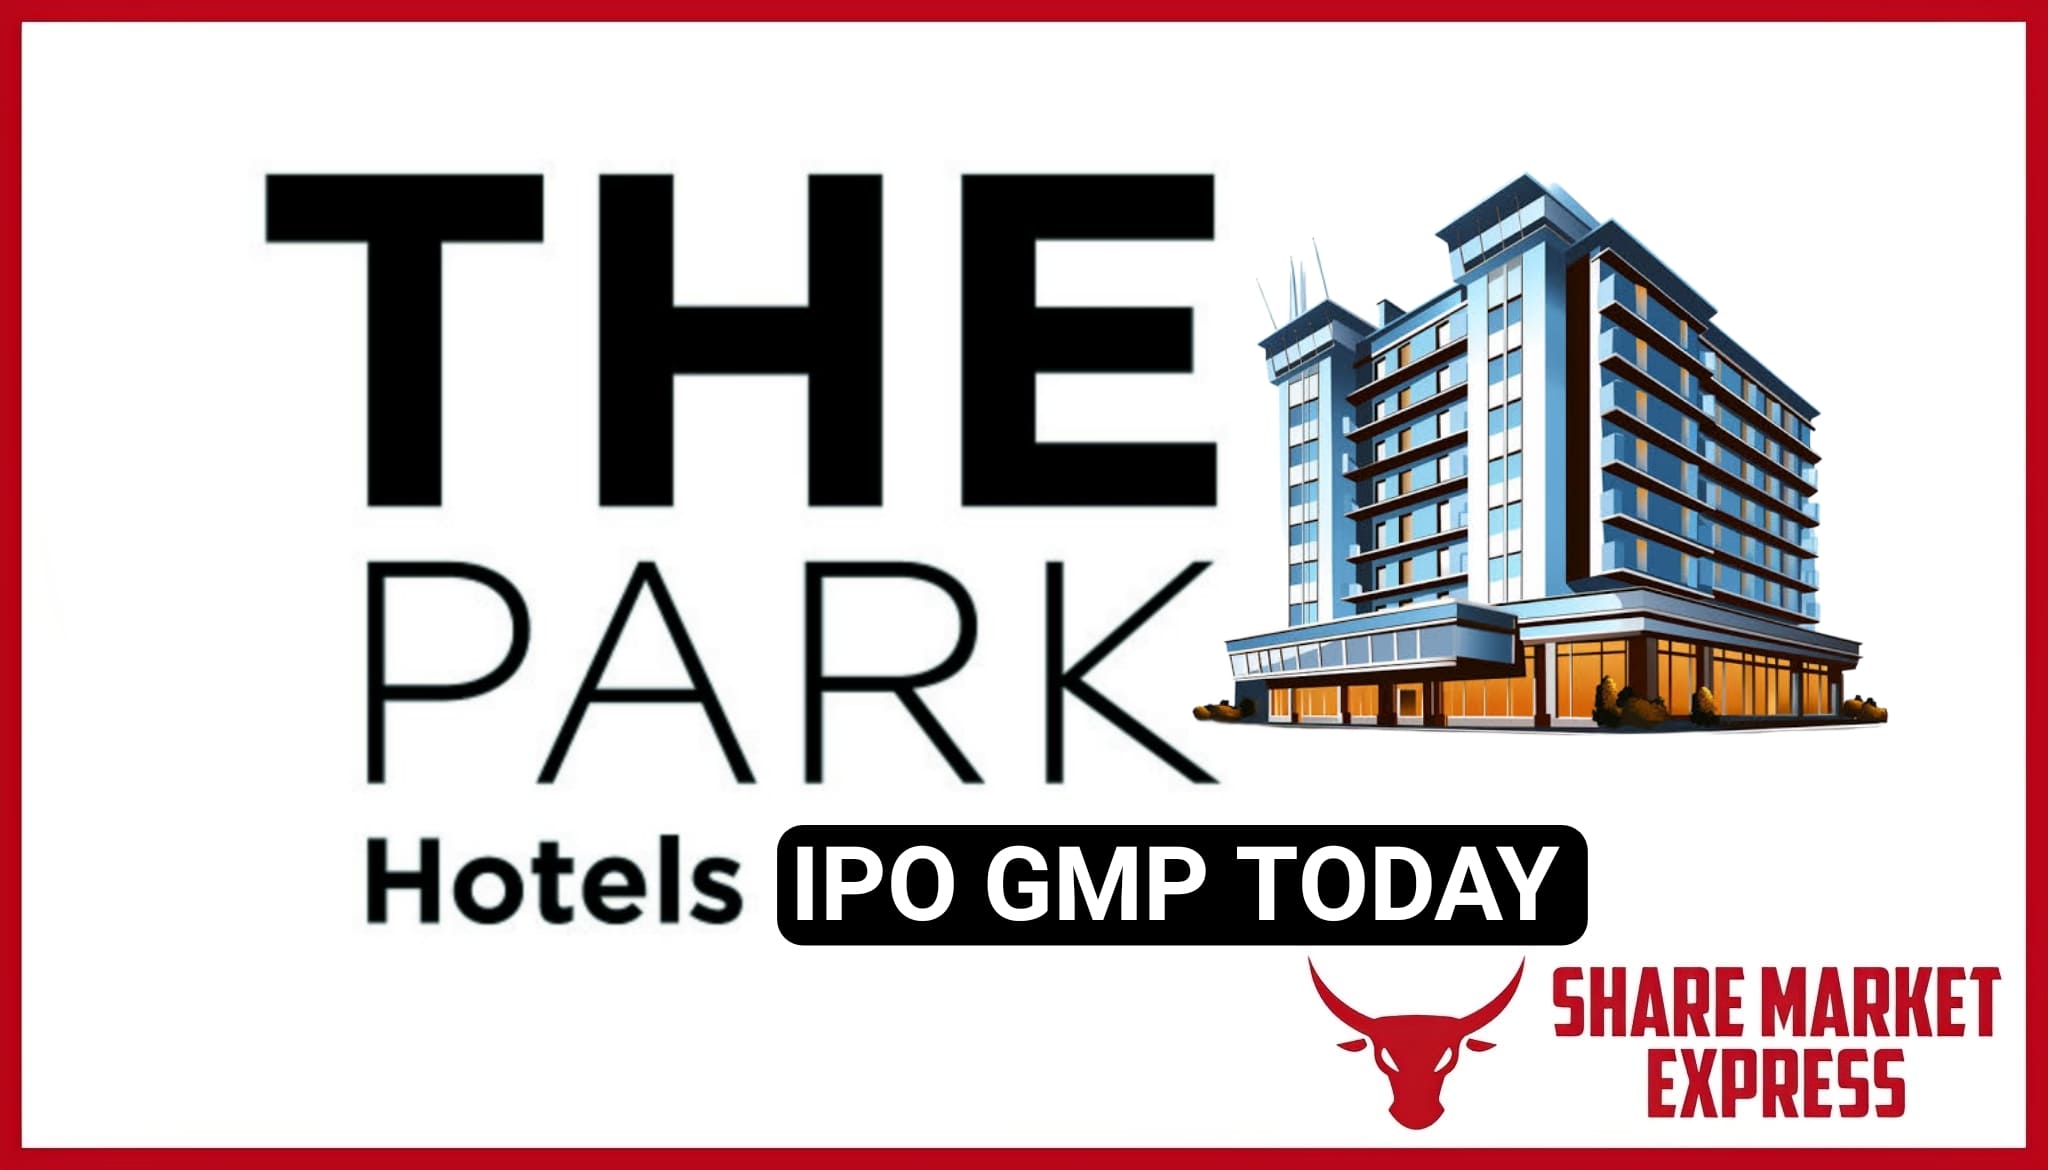 Apeejay Surrendra Park Hotels IPO GMP Today